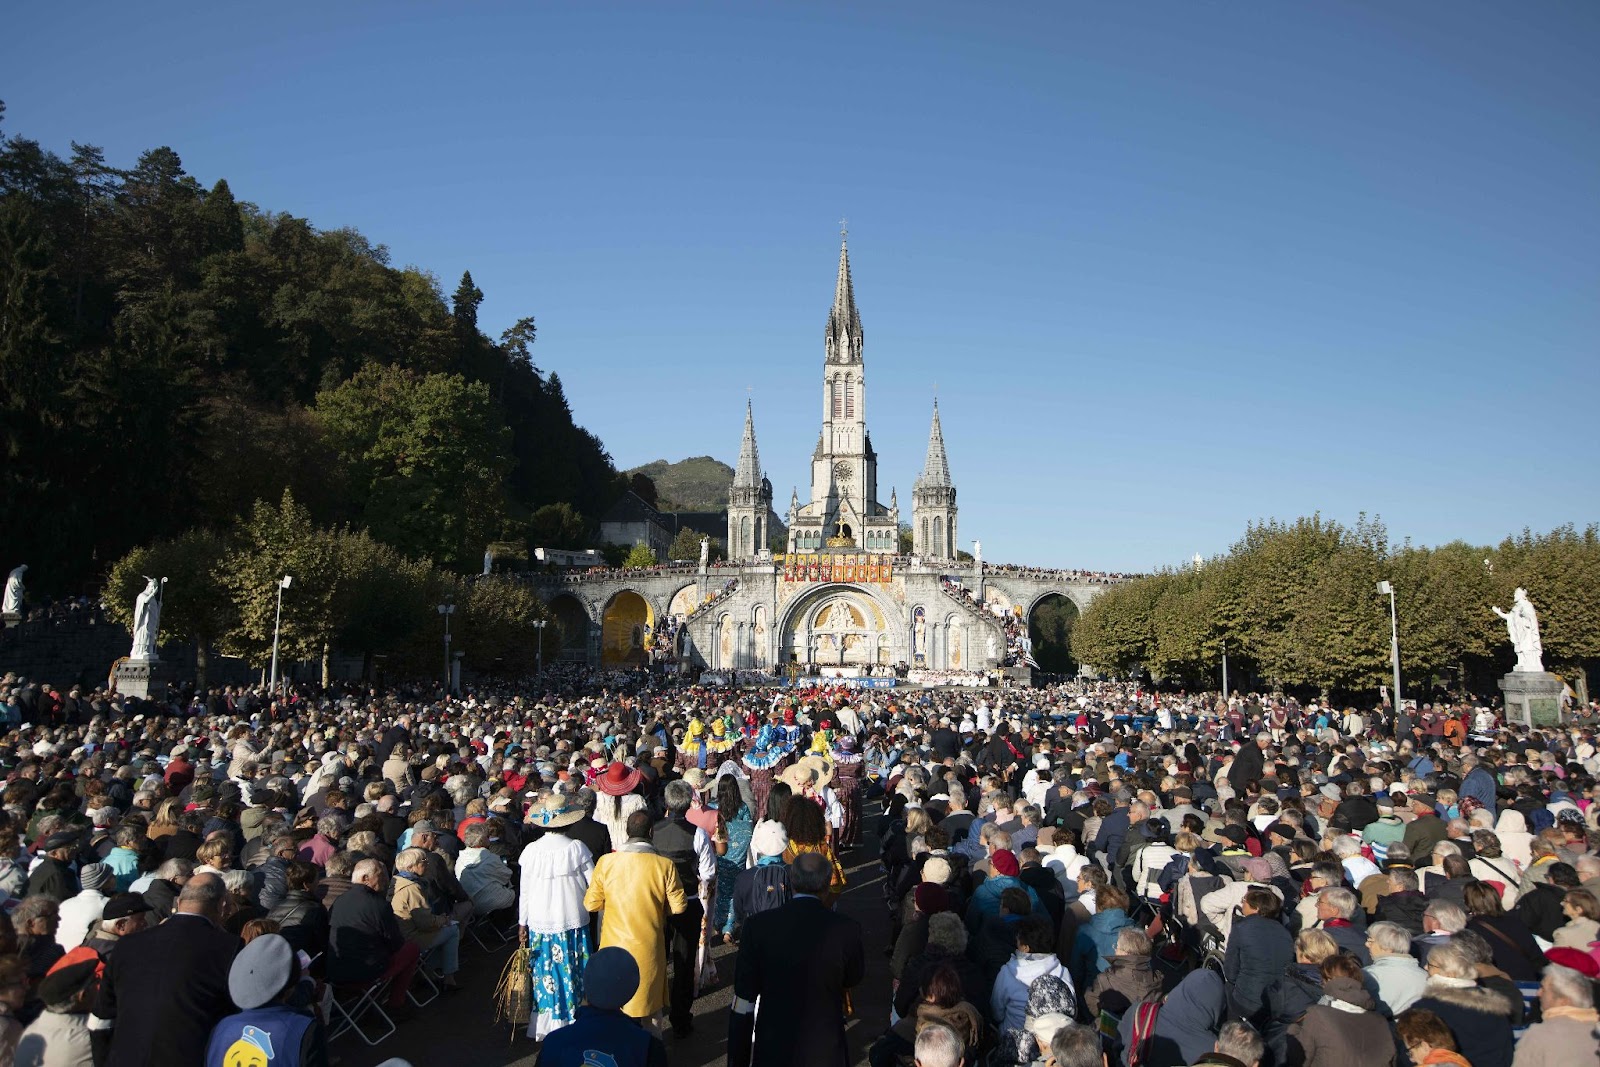 Why come to Lourdes?